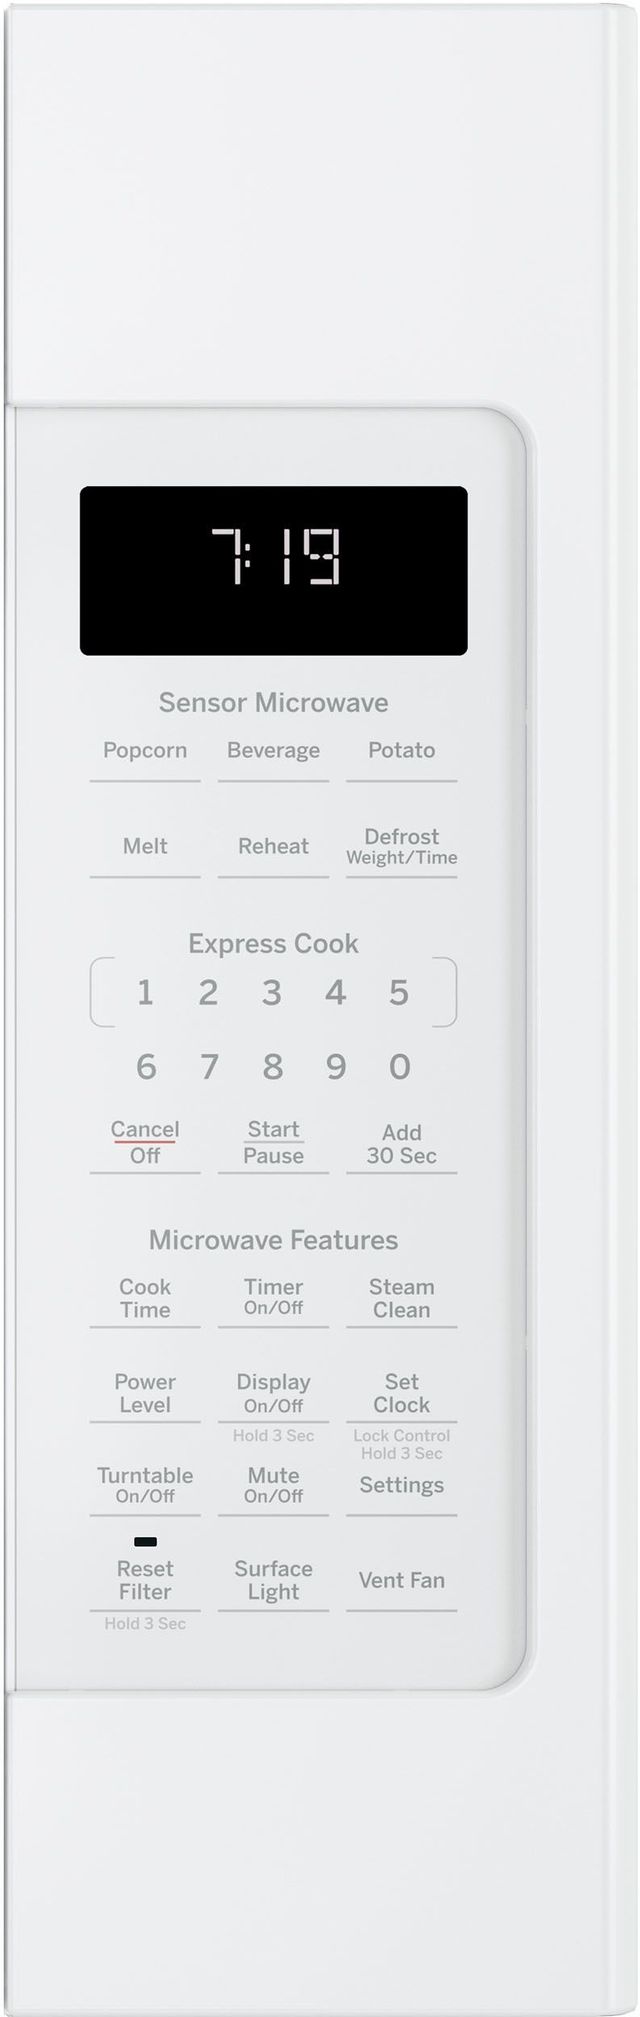 GE® Series 1.9 Cu. Ft. Stainless Steel Over The Range Microwave 1